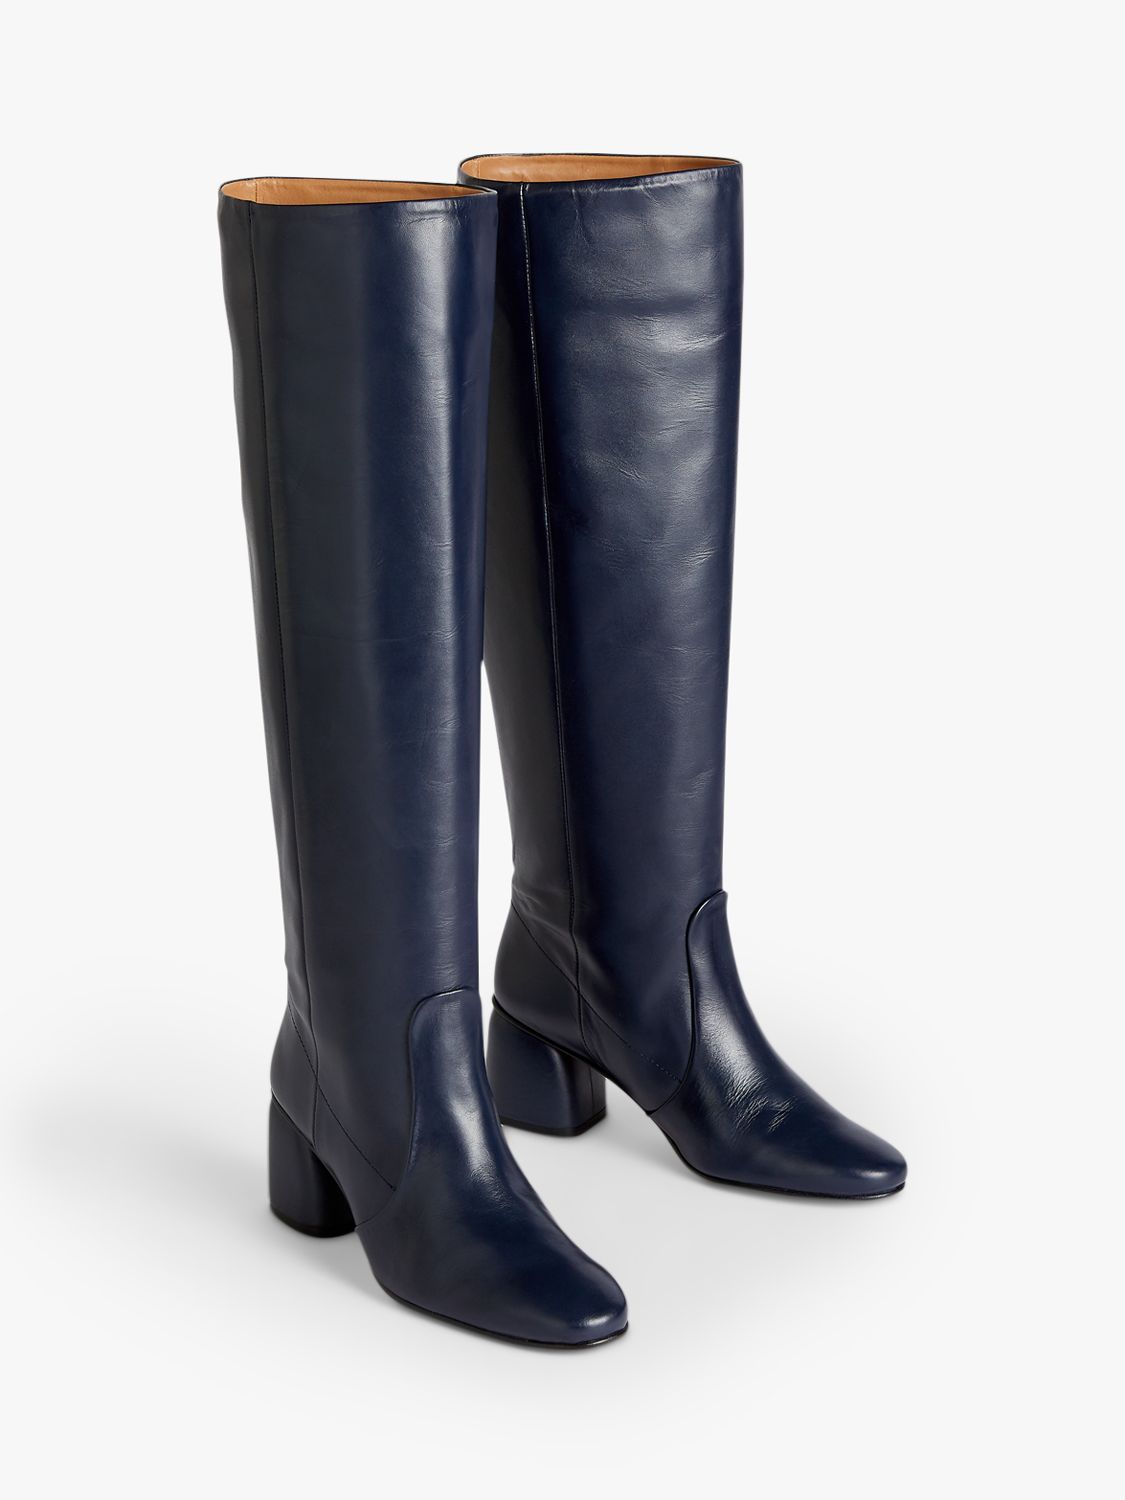 navy leather knee high boots